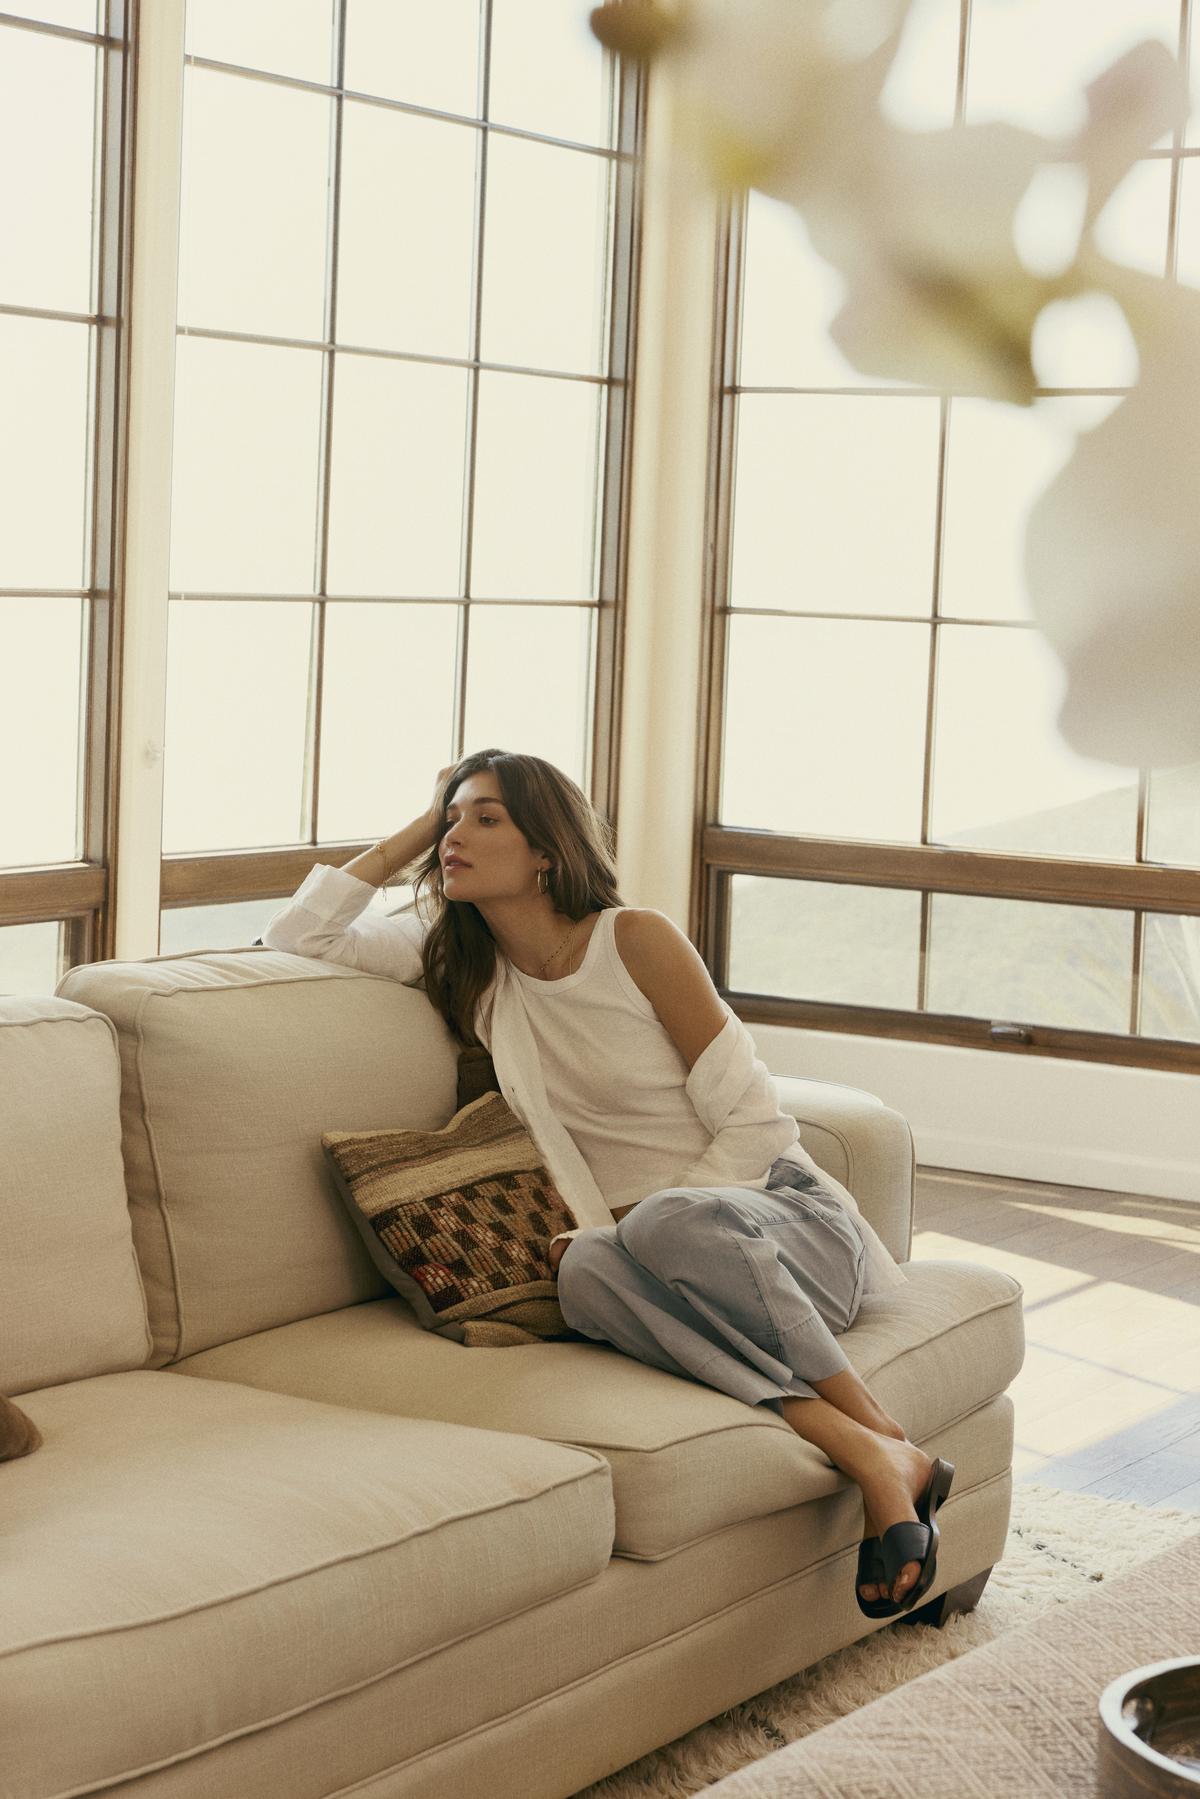 A woman in Velvet by Graham & Spencer's MYA COTTON CANVAS PANT lounges on a beige sofa beside large windows, looking pensive.-36443632009409